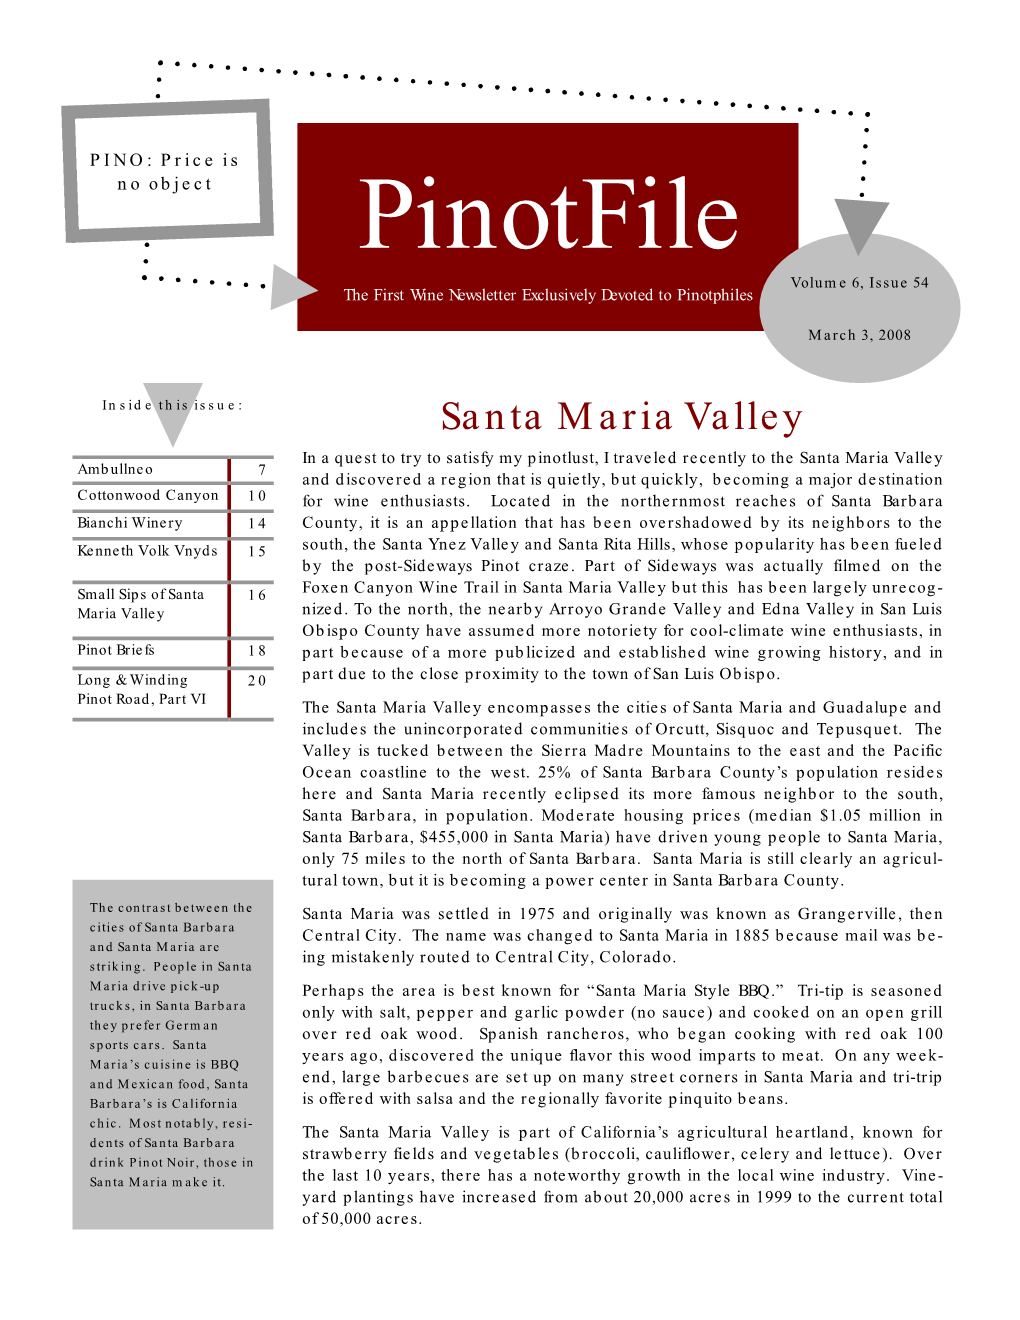 Pinotfile, Vol 6, Issue 54